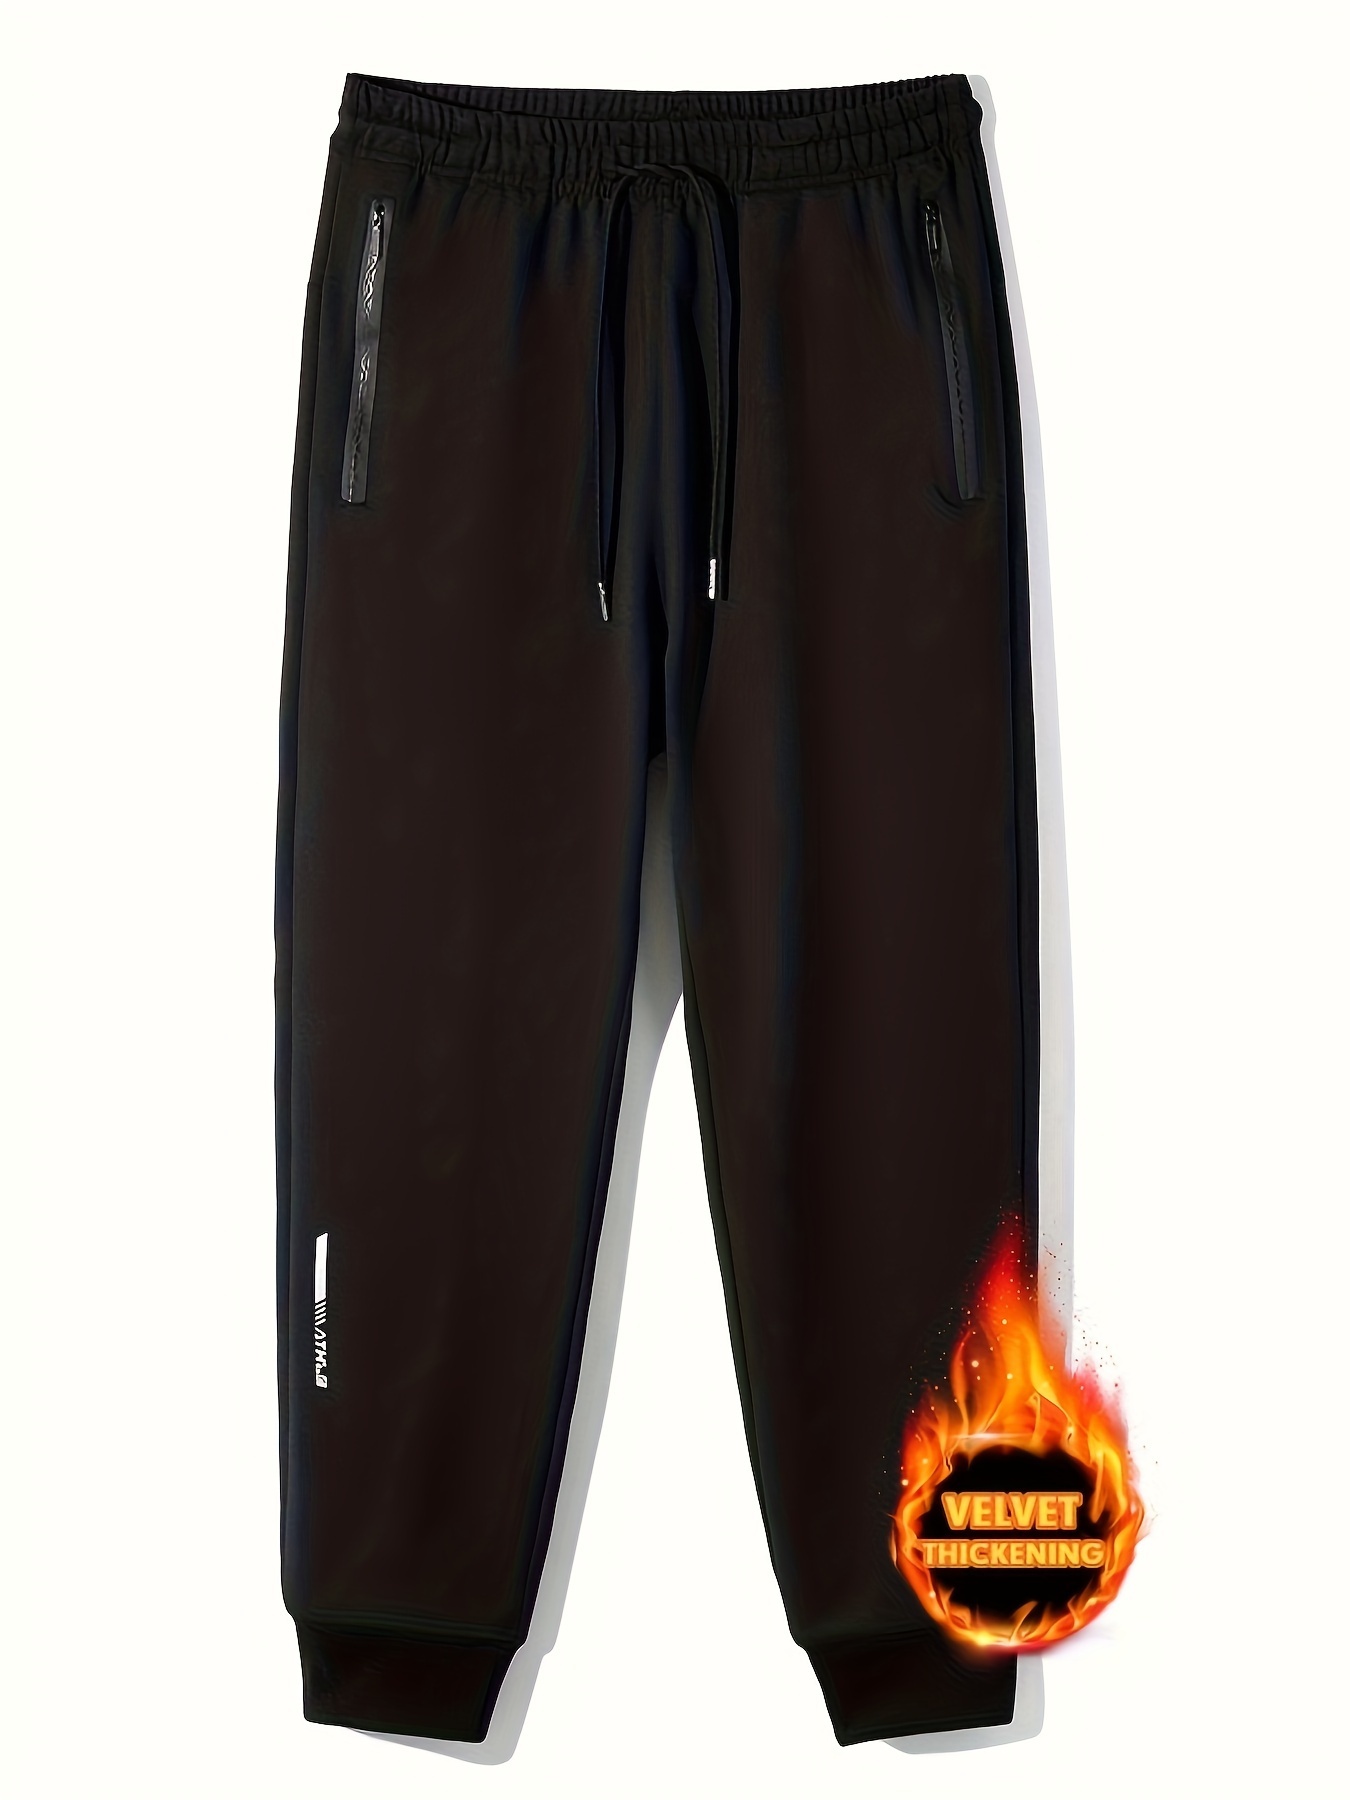 Warm Fleece Casual Pants, Men's Thick Sweatpants With Zipper Pockets For  Fall Winter